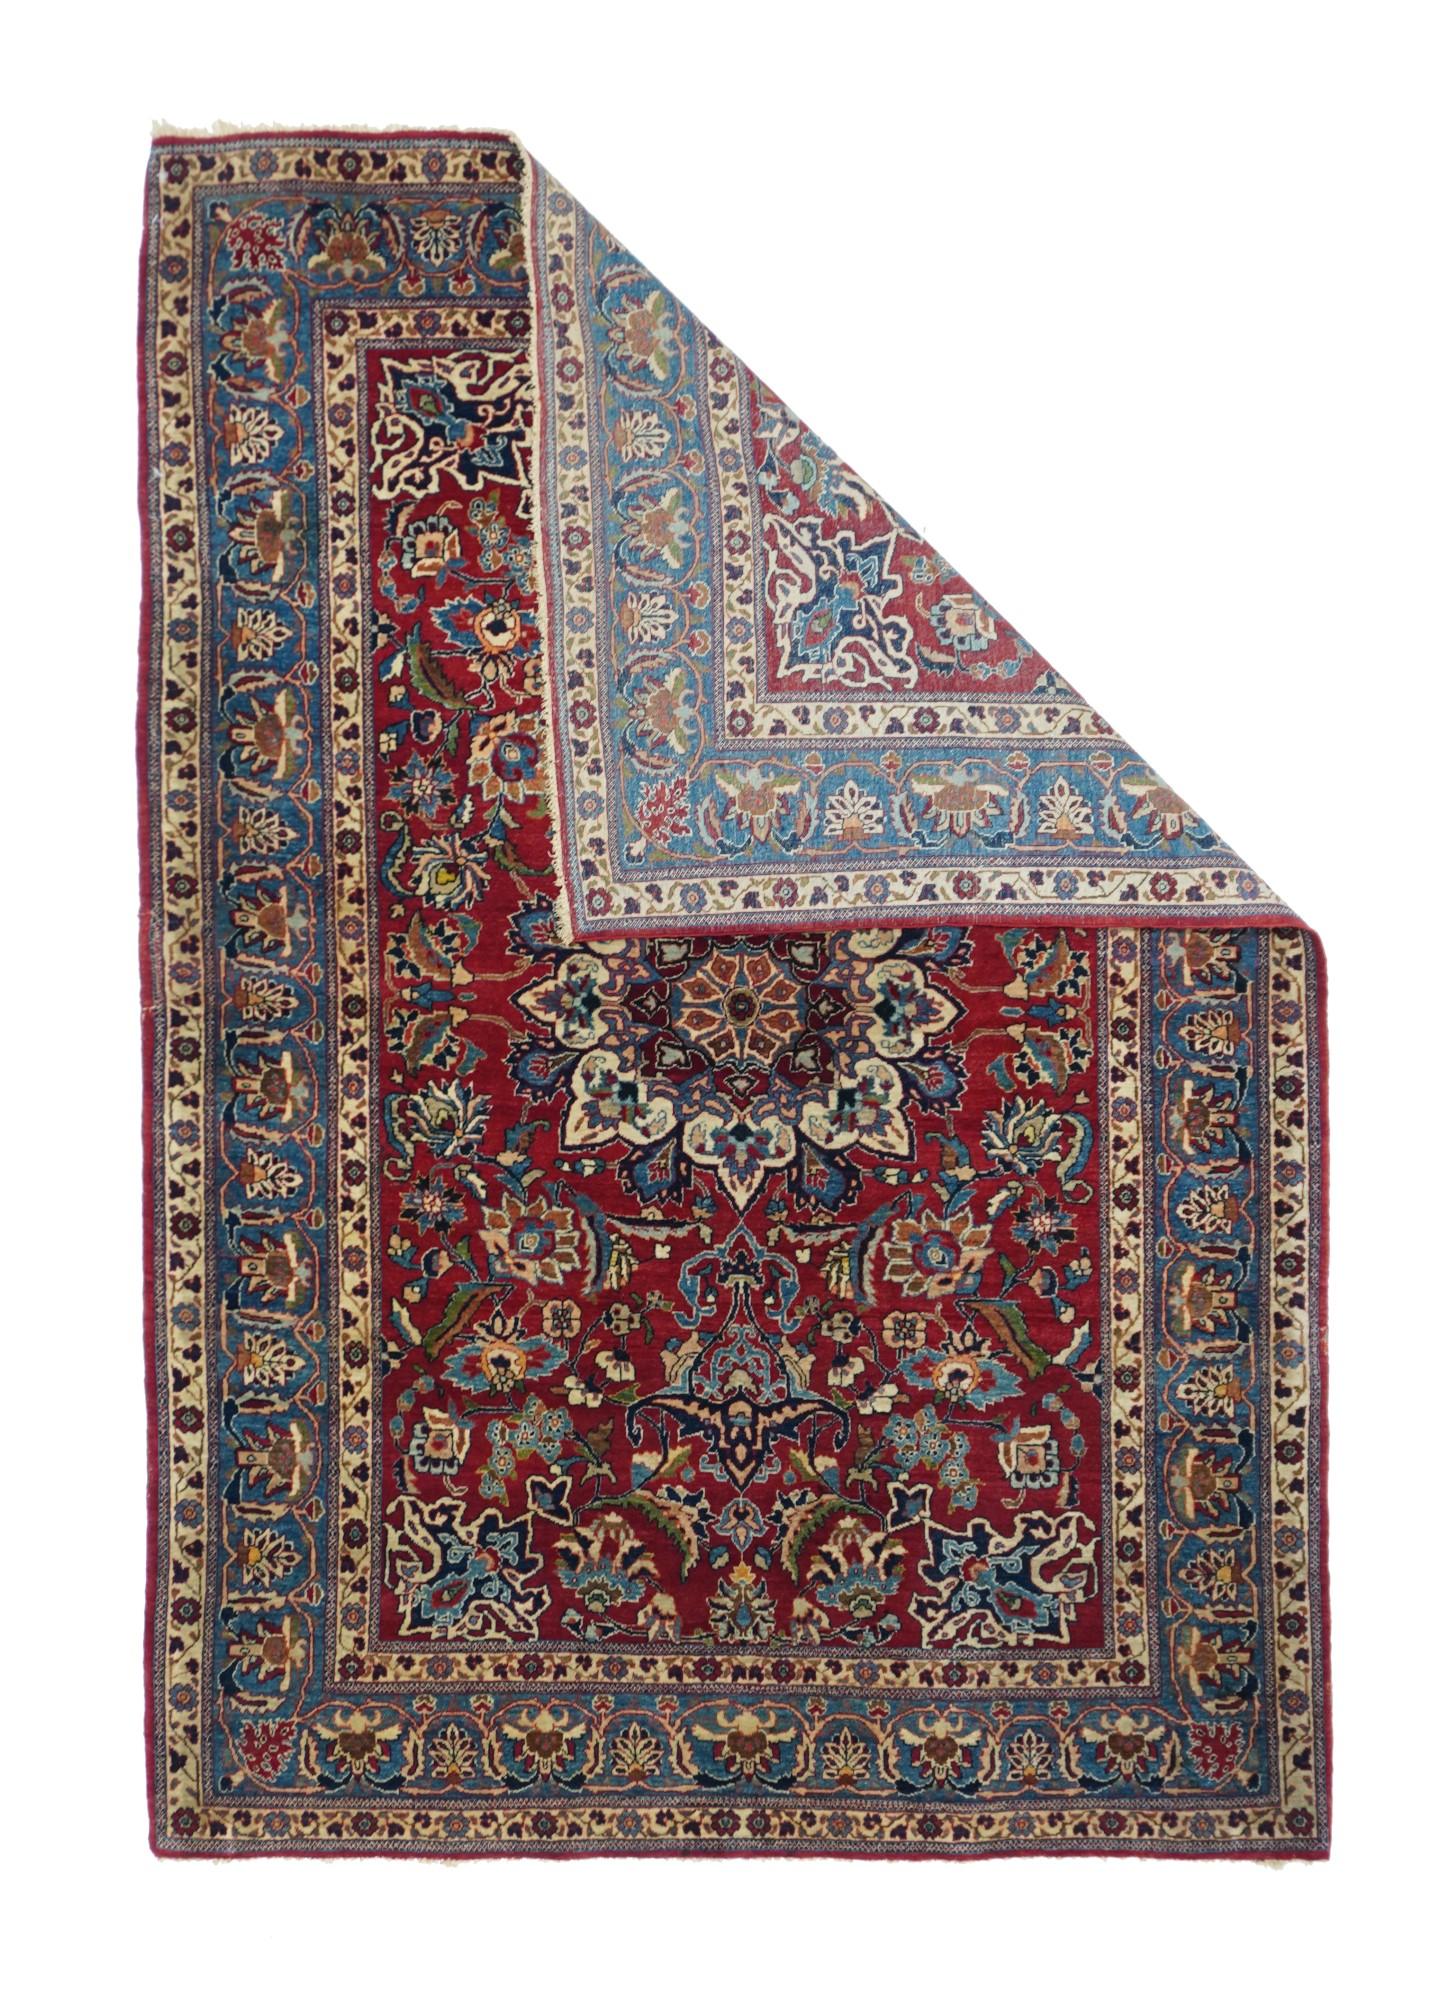 This very finely woven central Persian town small scatter shows a rich palette starting with the saturated red field which support a central ivory round medallion with eight spadiform points. Cerulean blue outlines the pendants, navy pointed